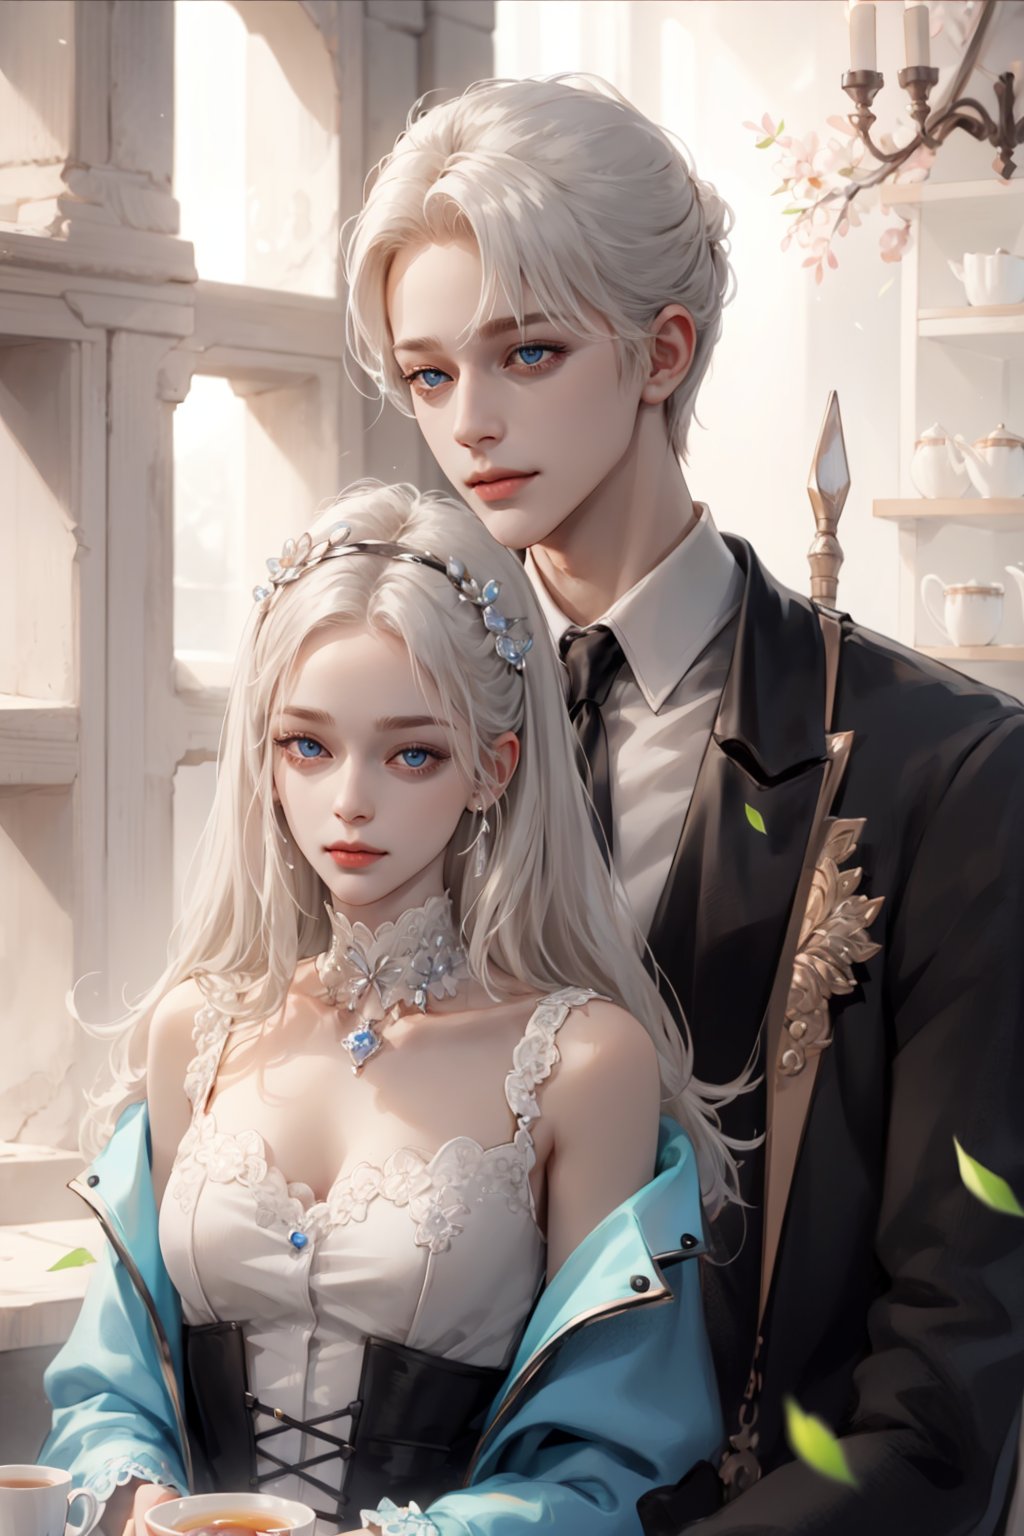 (asterpiece:1.2, best quality), (Soft light), (shiny skin), couple, romantic, kingdom, blonde_hair_woman, silver_hair_boy, eyelashes, collarbone, victorian, blue eyes, long_curly_blonde_hair_woman, short_silver_hair_boy, silver_hair_boy, couple_(romantic), happy face, formal outfit, tea time